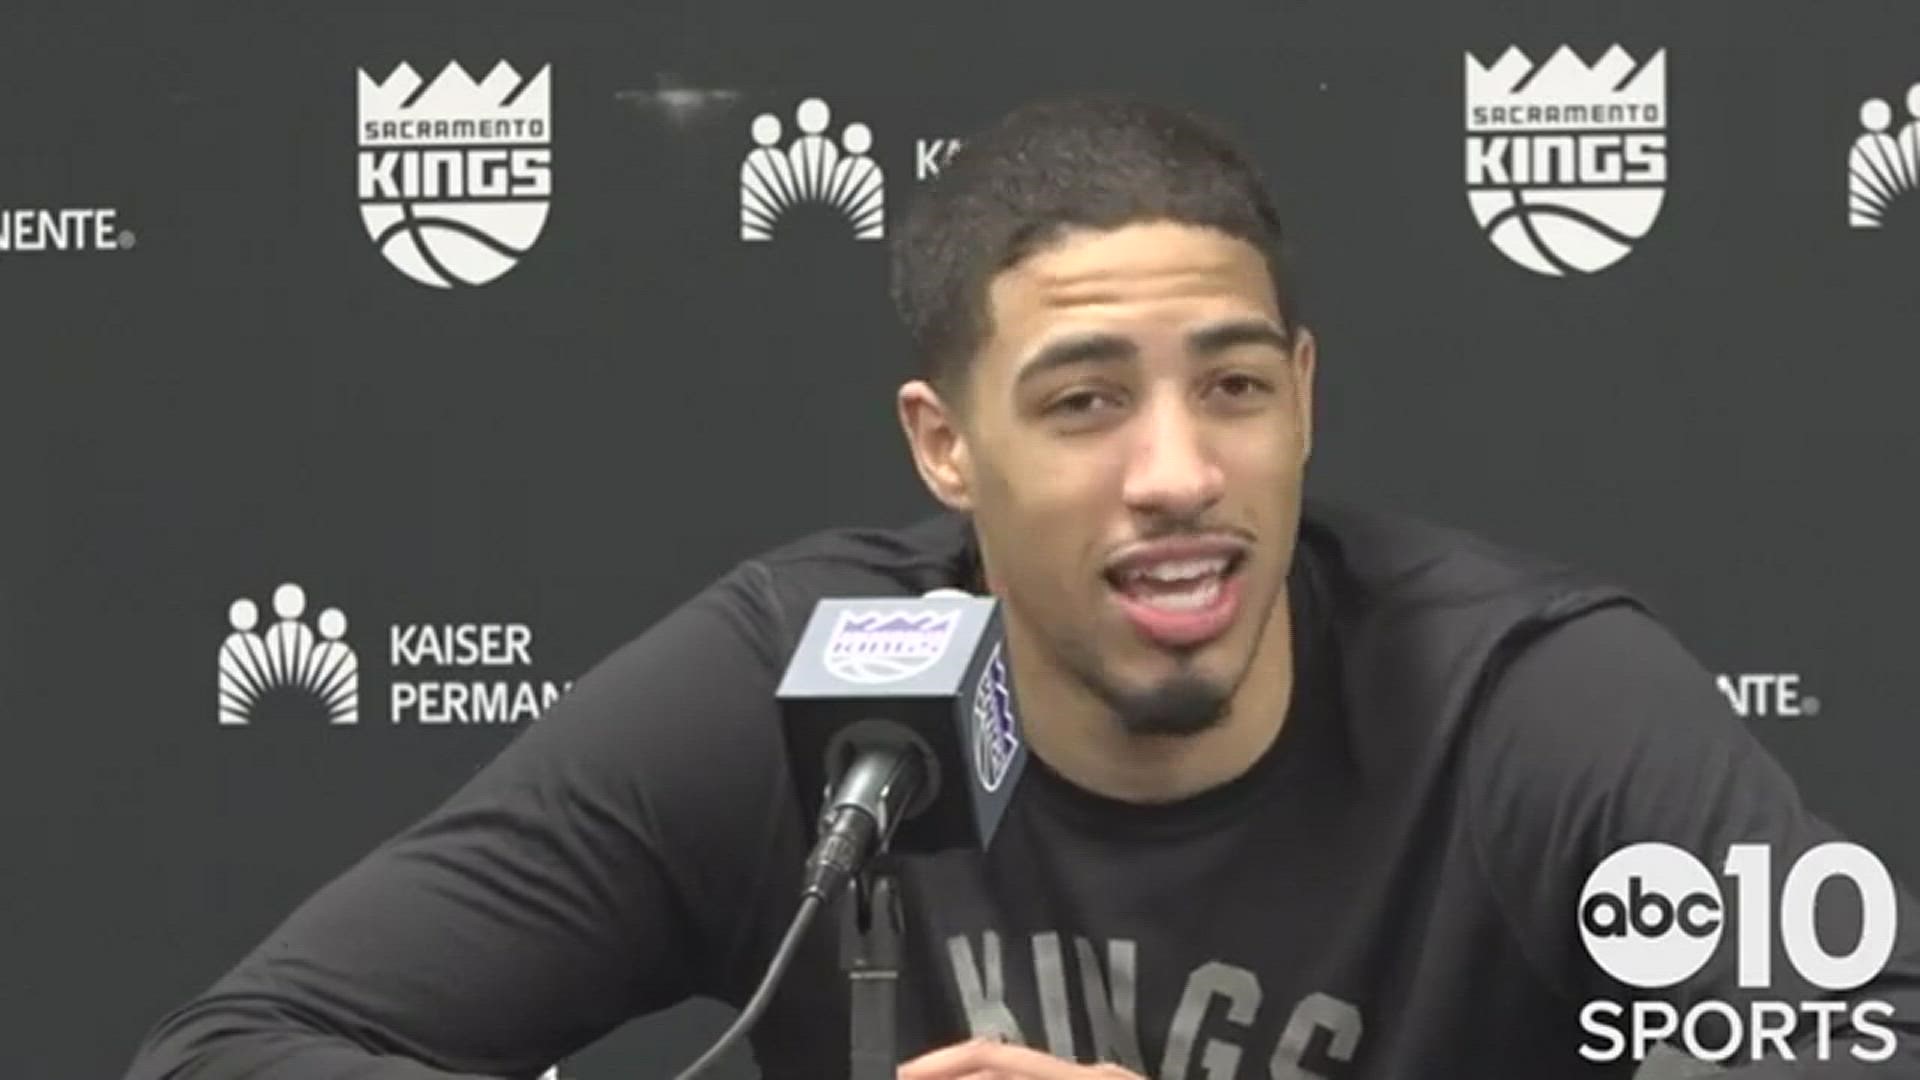 Tyrese Haliburton talks about the Kings' 119-105 victory over the Washington Wizards on Wednesday and earning Doug Christie a victory in his head coaching debut.